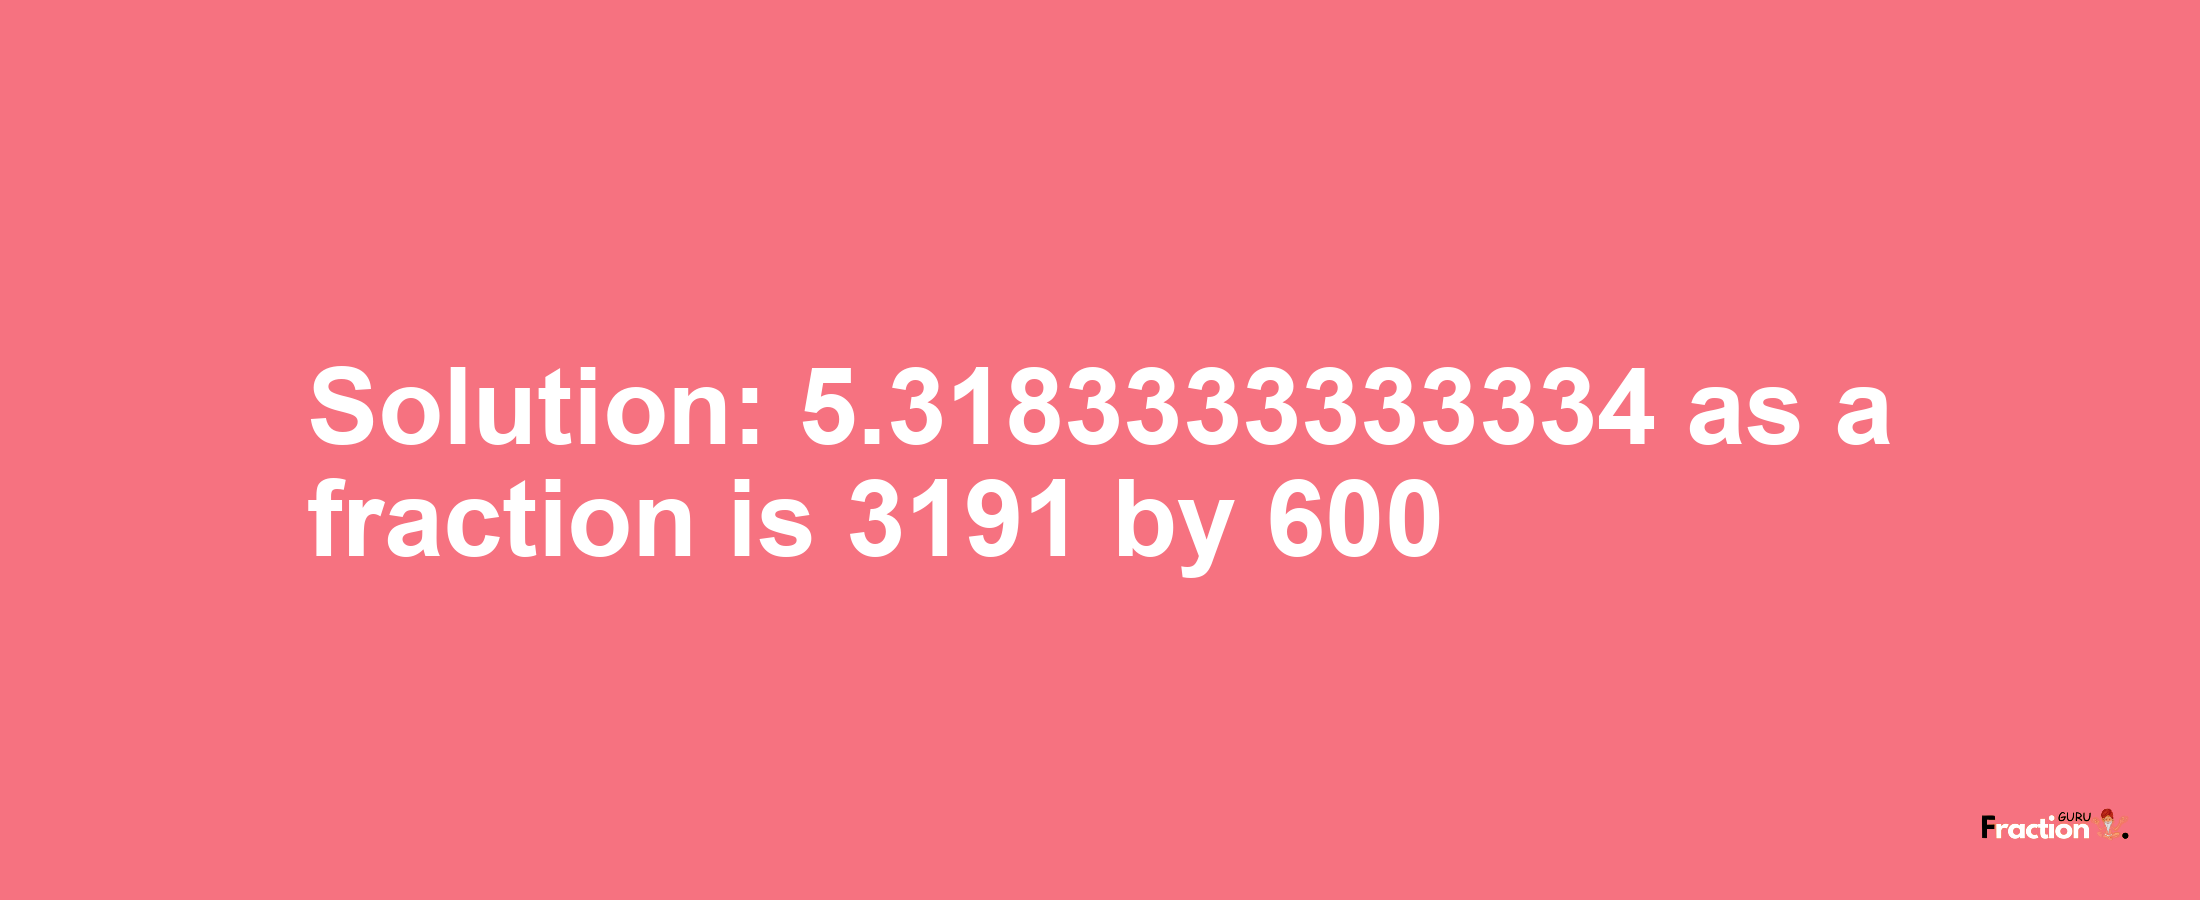 Solution:5.3183333333334 as a fraction is 3191/600